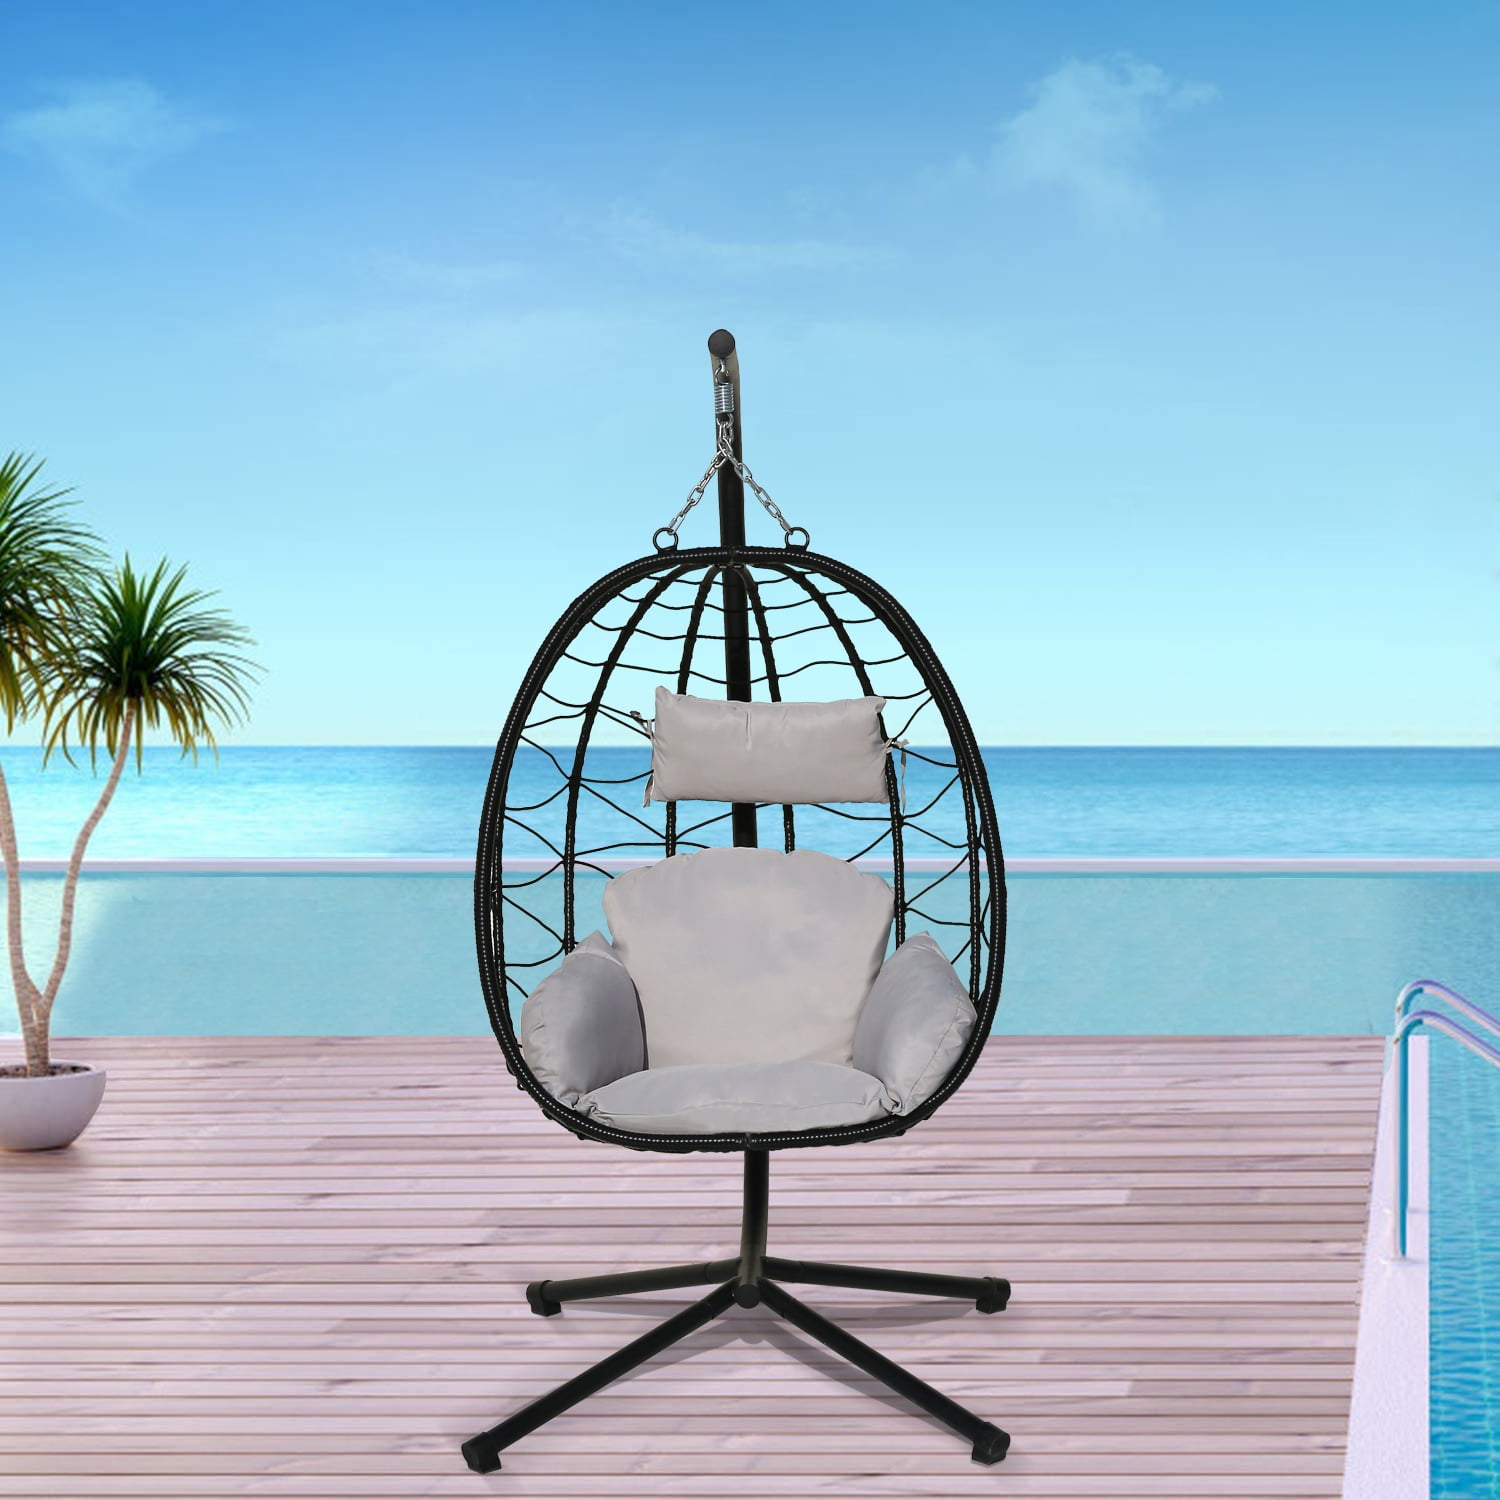 Hanging Egg Chair w/Cushion&Stand, BTMWAY Outdoor UV